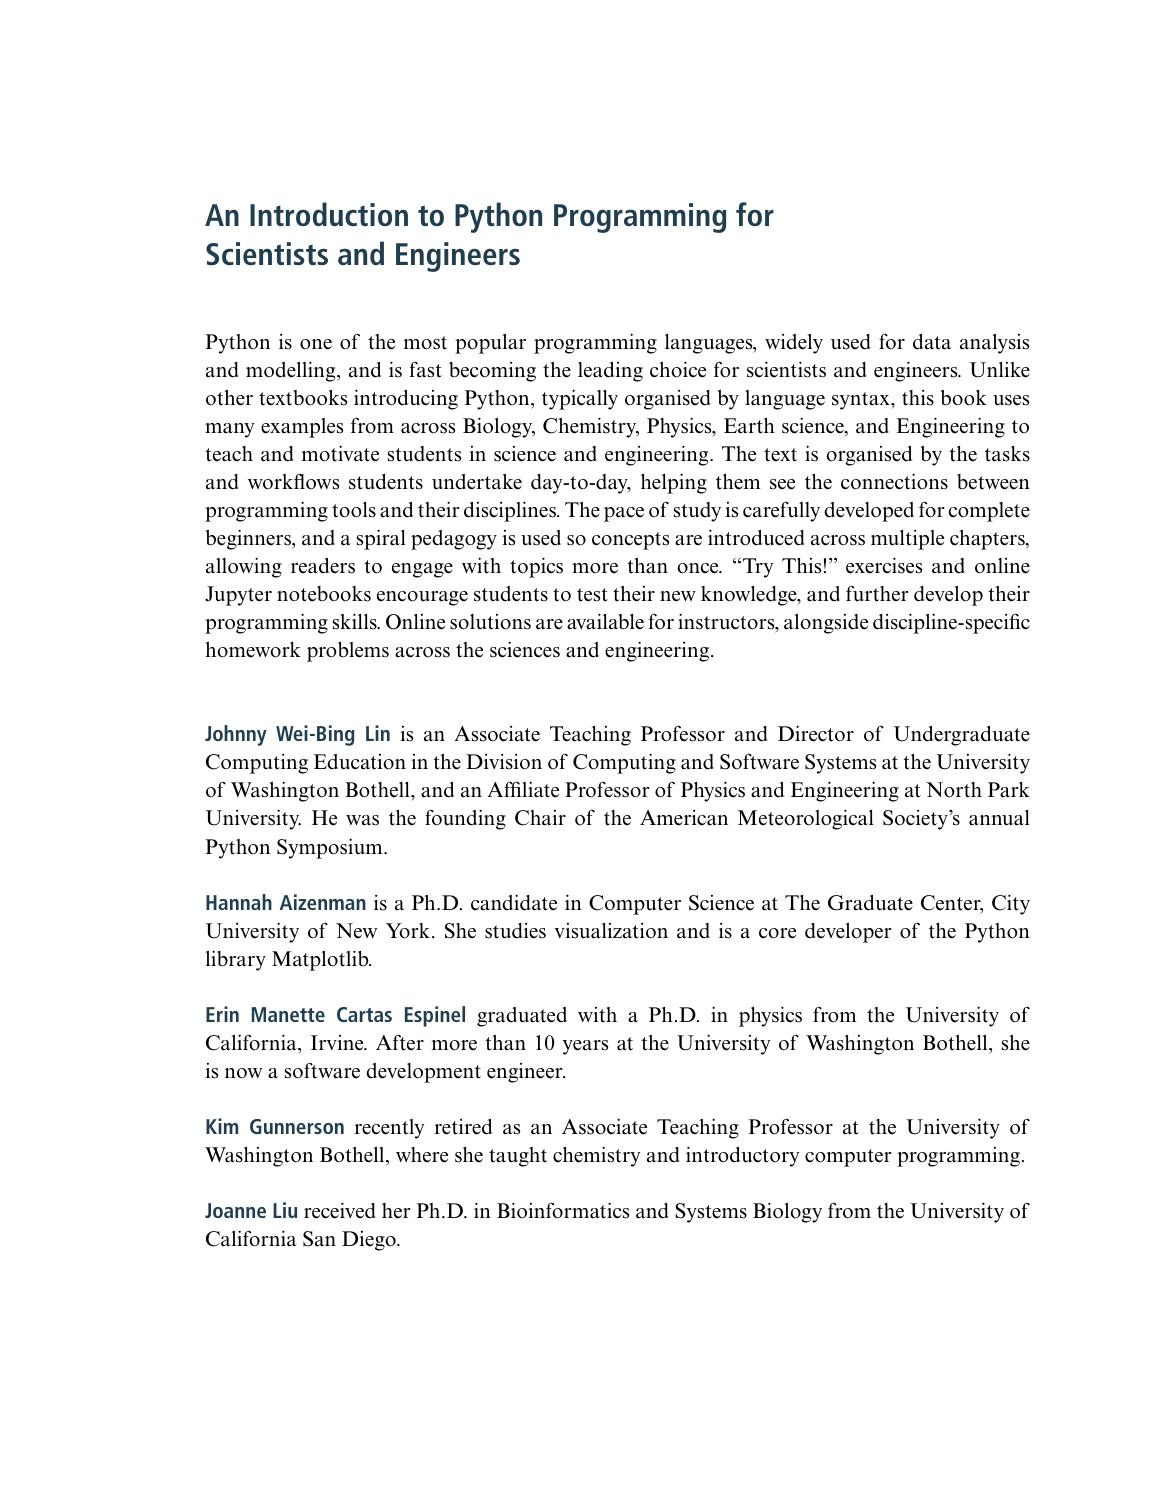 An Introduction to Python Programming for Scientists and Engineers by Johnny Wei-Bing Lin Hannah Aizenman Erin Manette Cartas Espinel Kim Gunnerson Joanne Liu